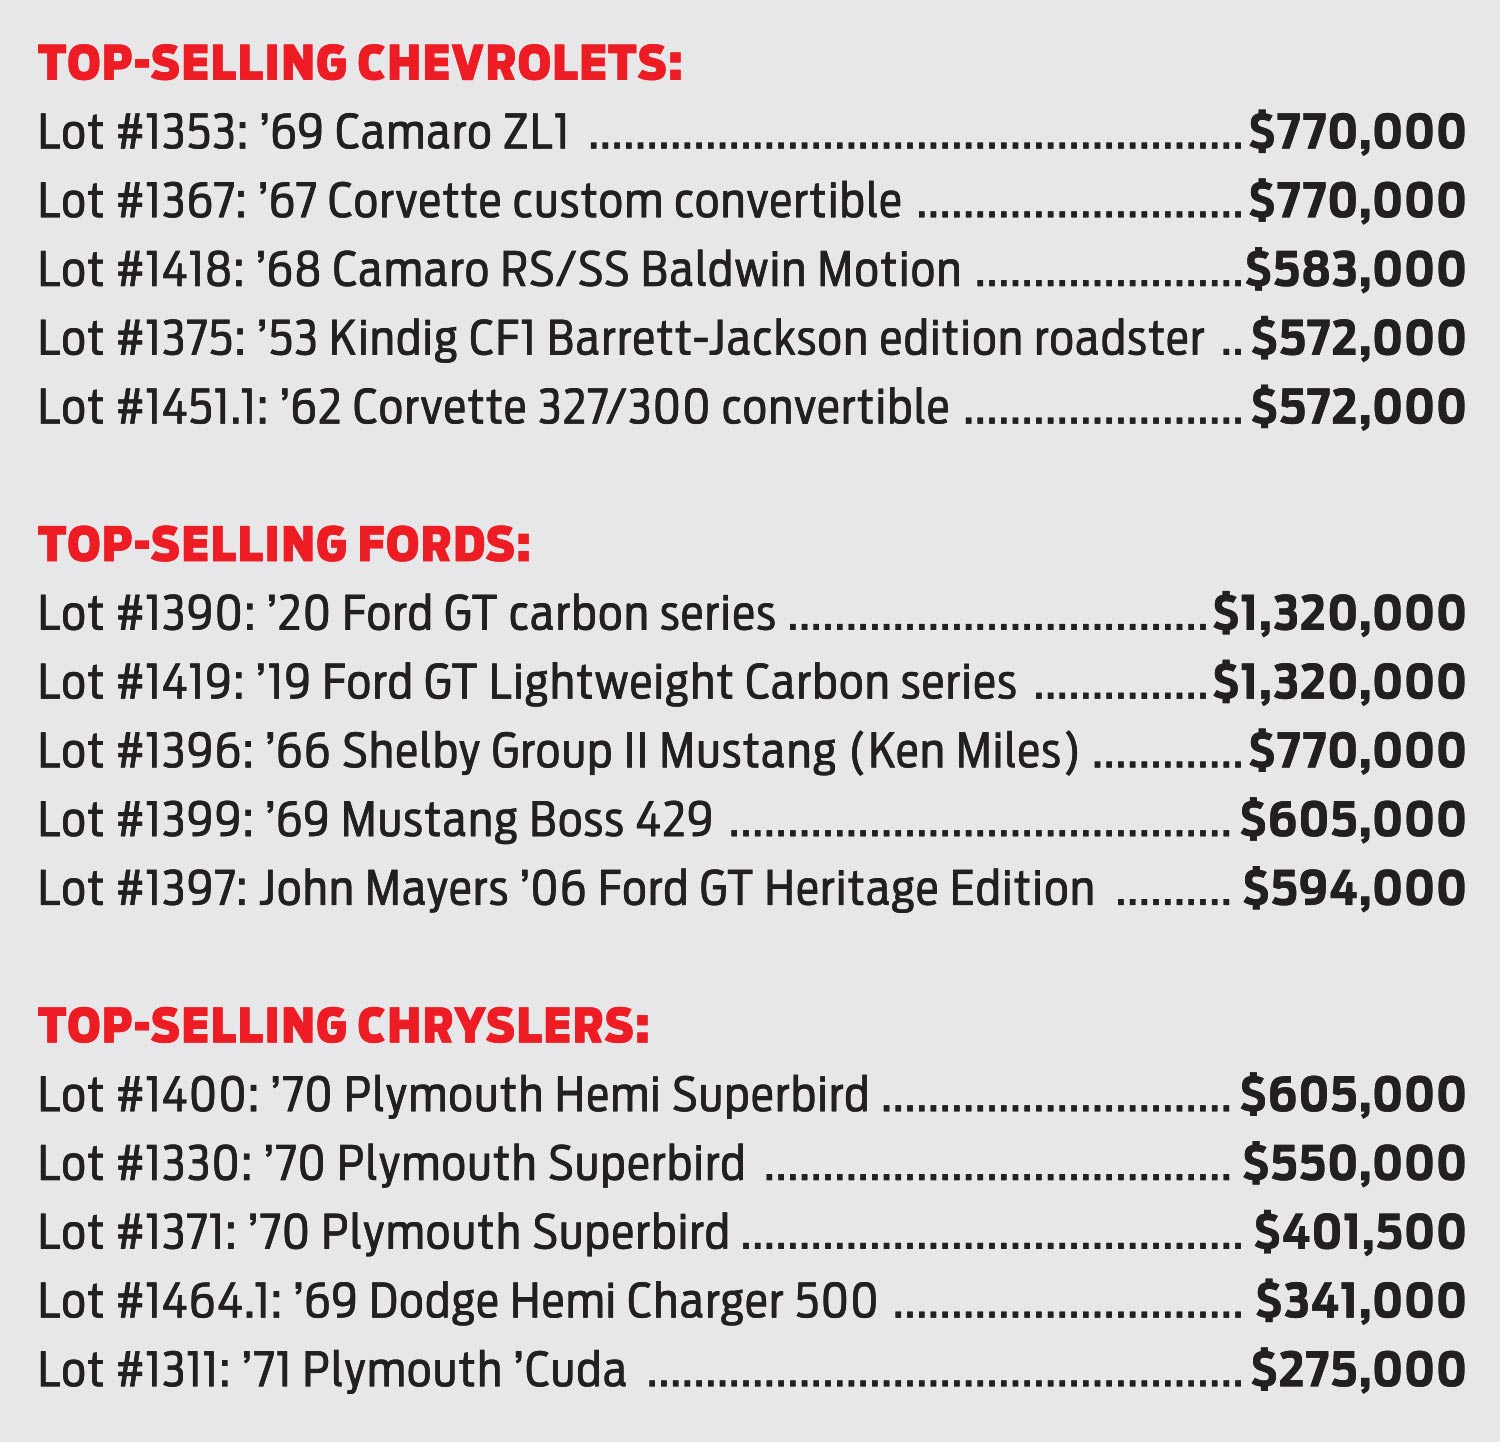 Listings of Top 5 selling Chevys, Fords, and Chryselers